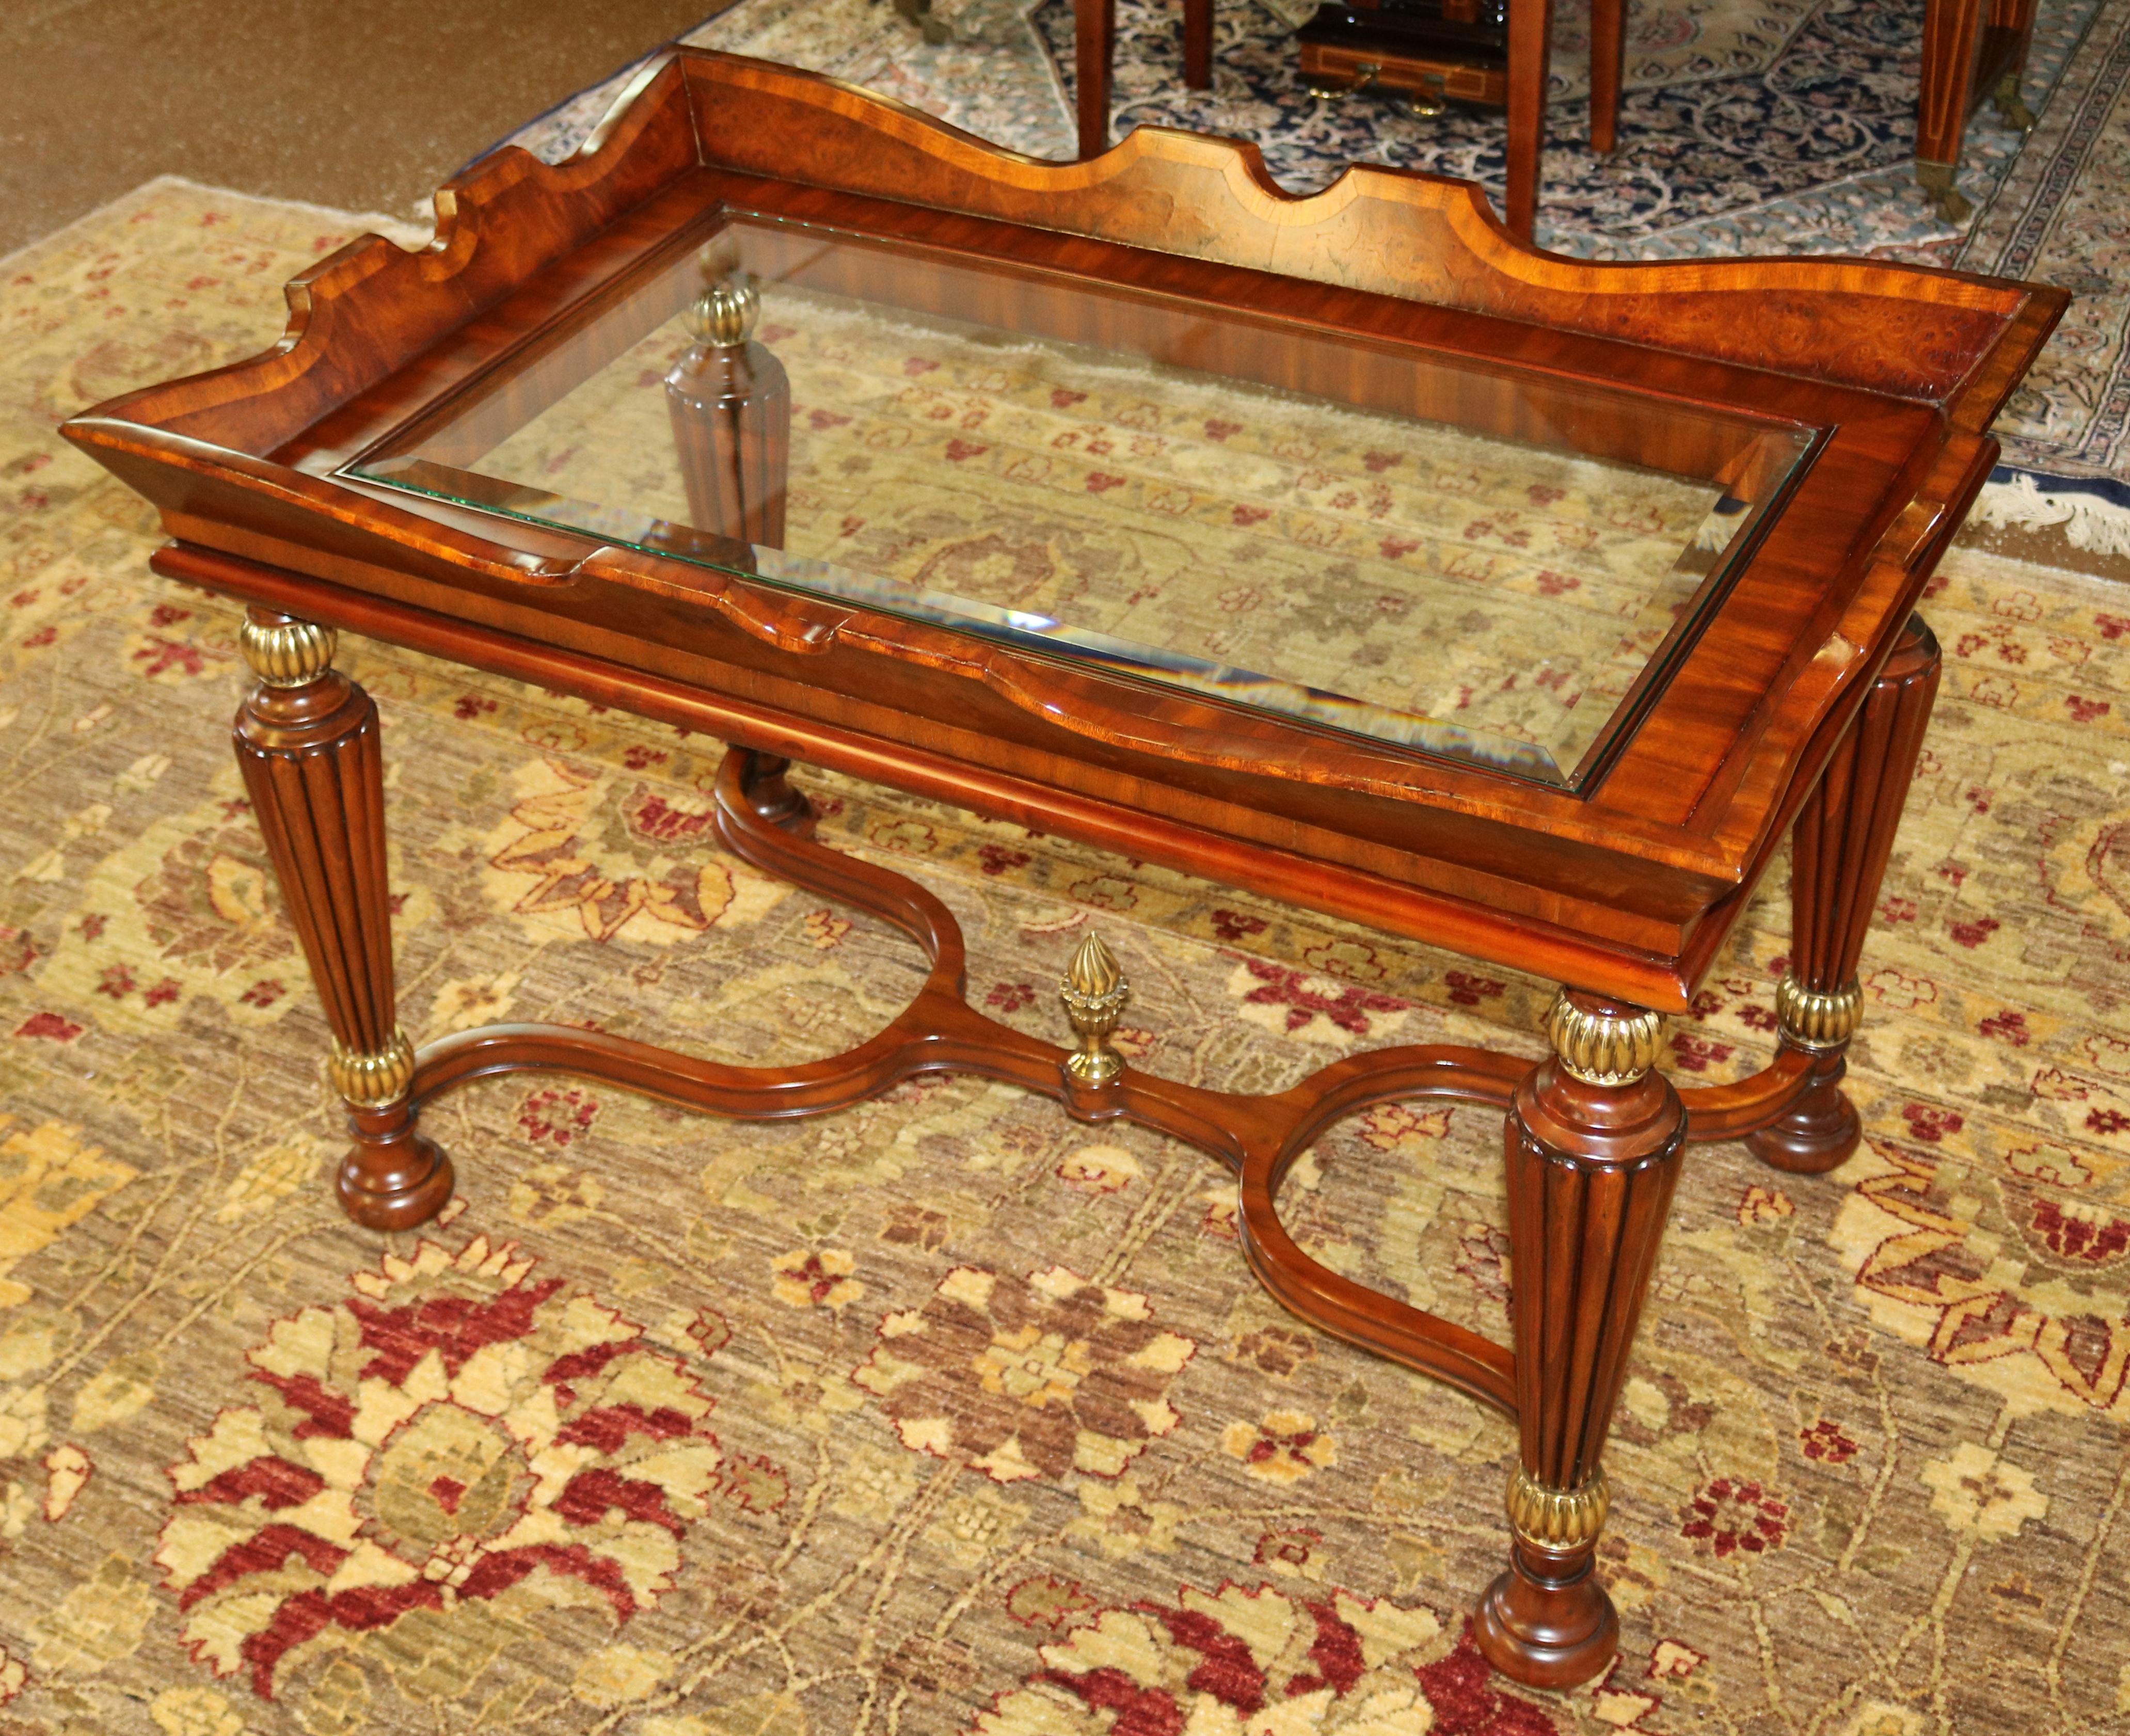 Regency Mahogany & Burled Beveled Glass Cocktail Coffee Table By Maitland Smith For Sale